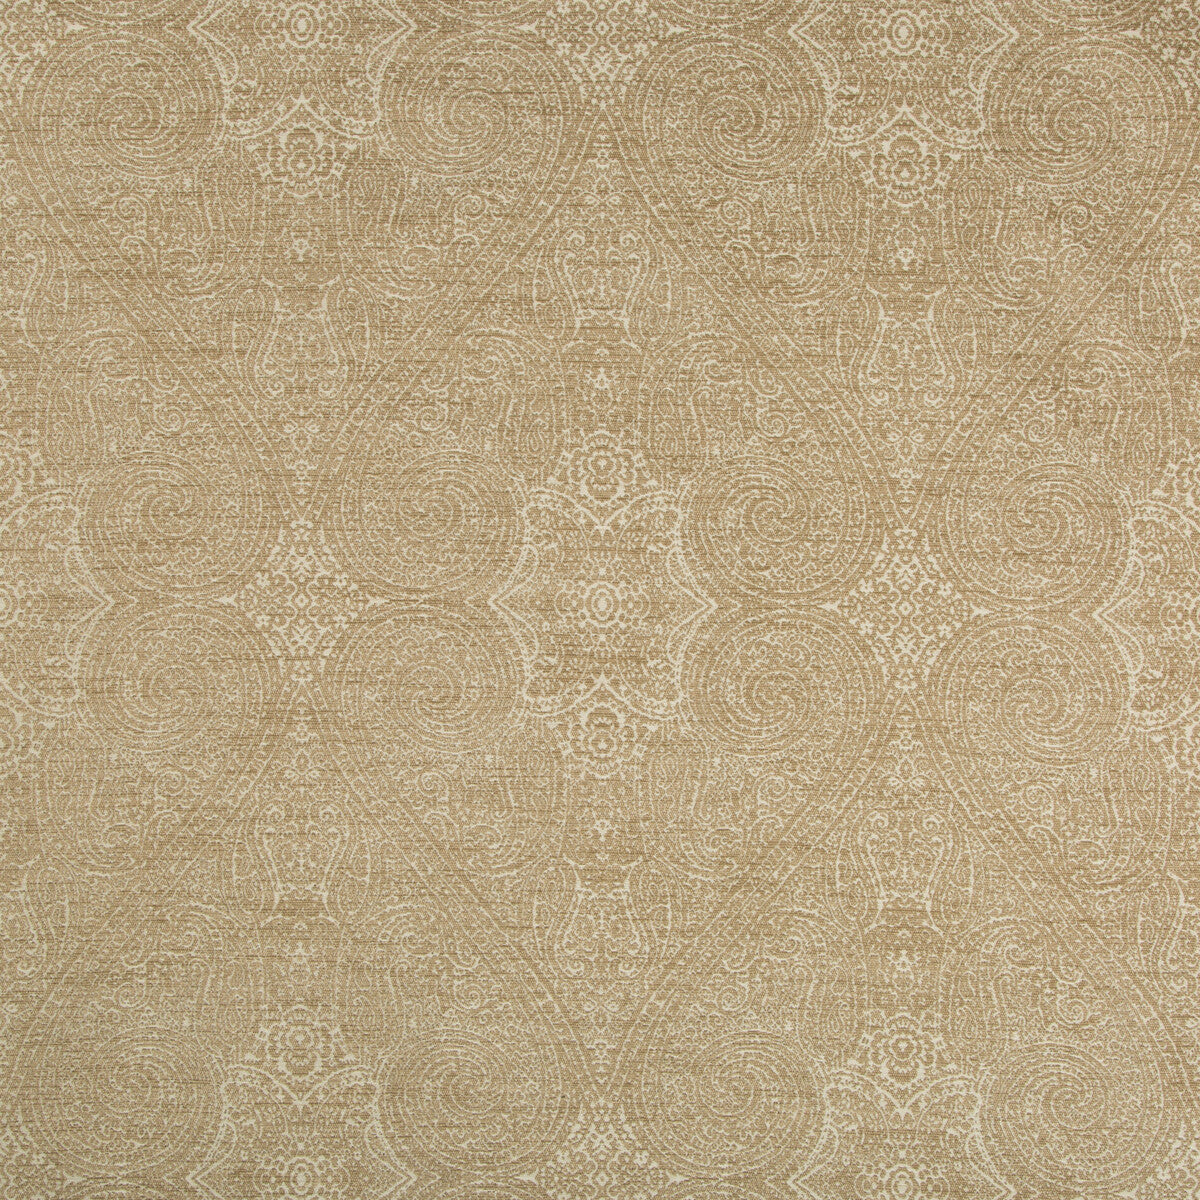 Kravet Design fabric in 35126-606 color - pattern 35126.606.0 - by Kravet Design in the Performance Crypton Home collection